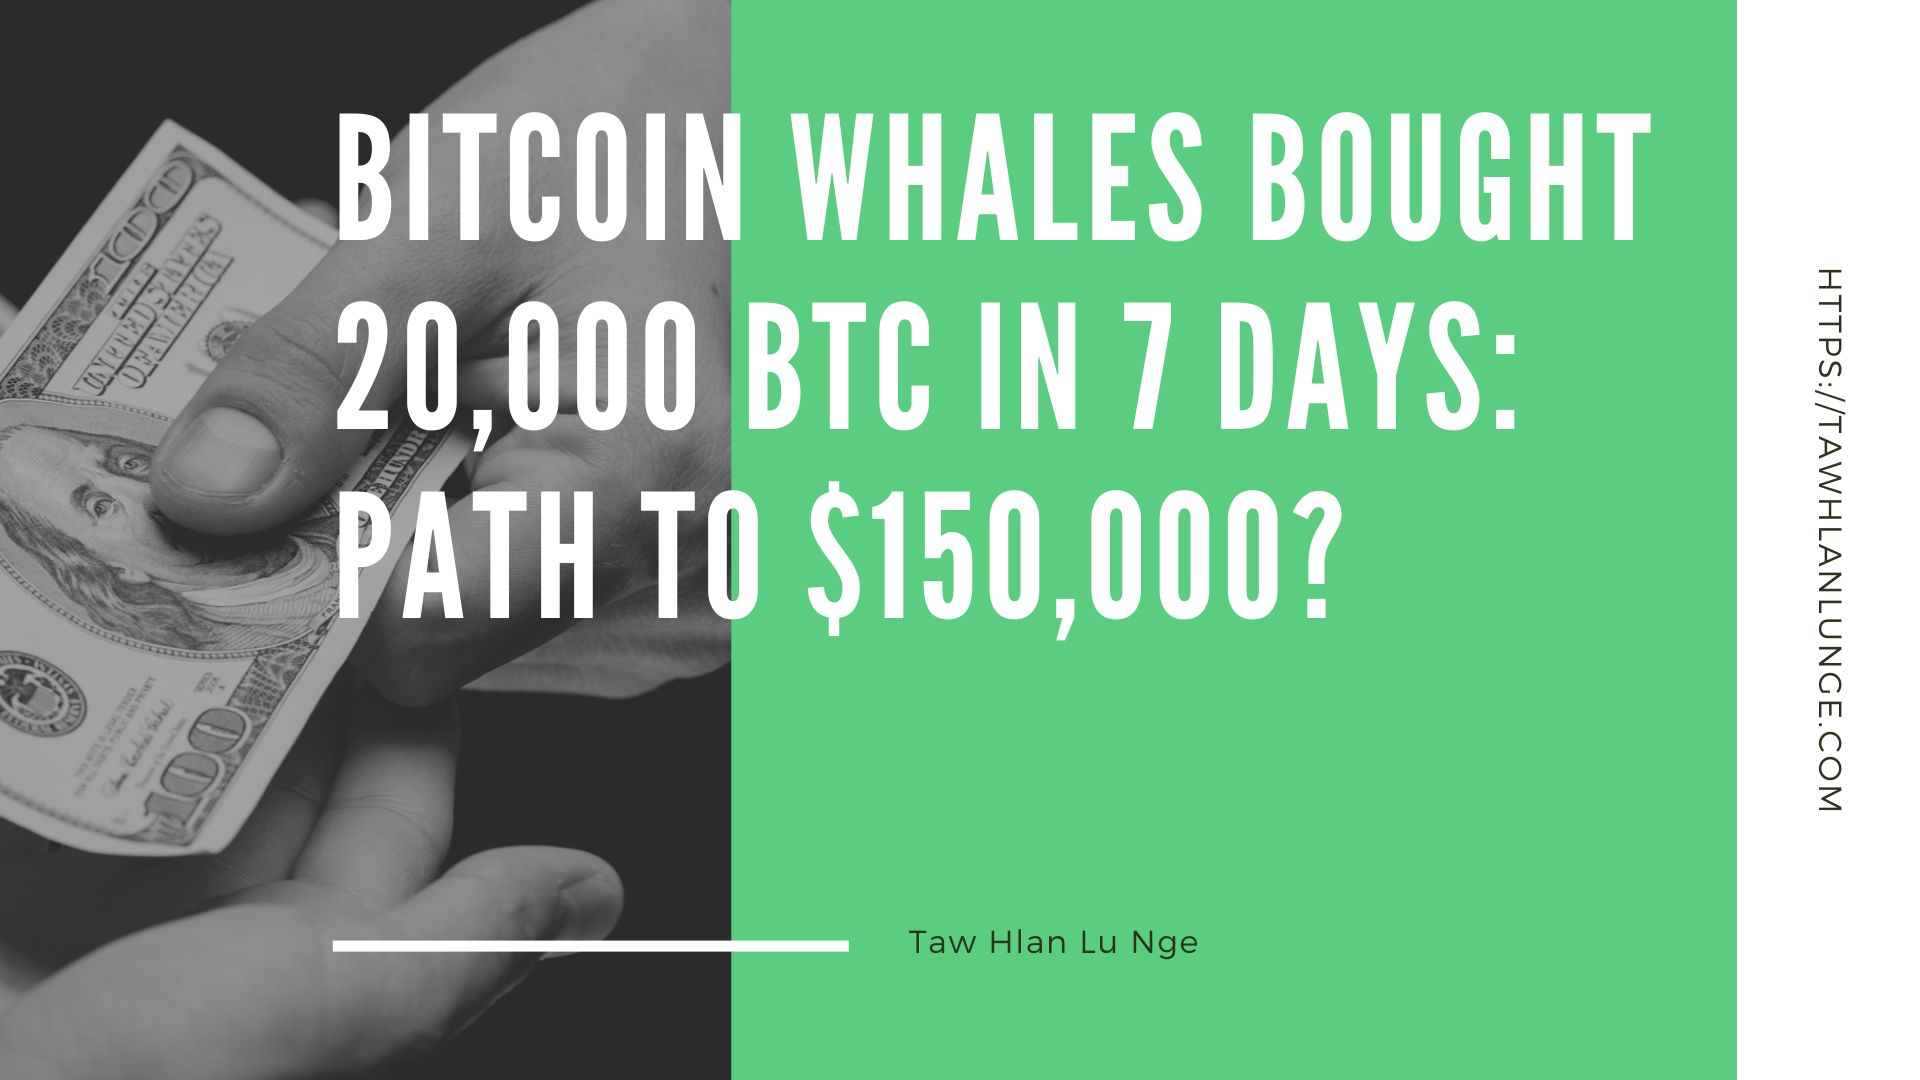 Bitcoin Whales Bought 20,000 BTC In 7 Days: Path To $150,000?